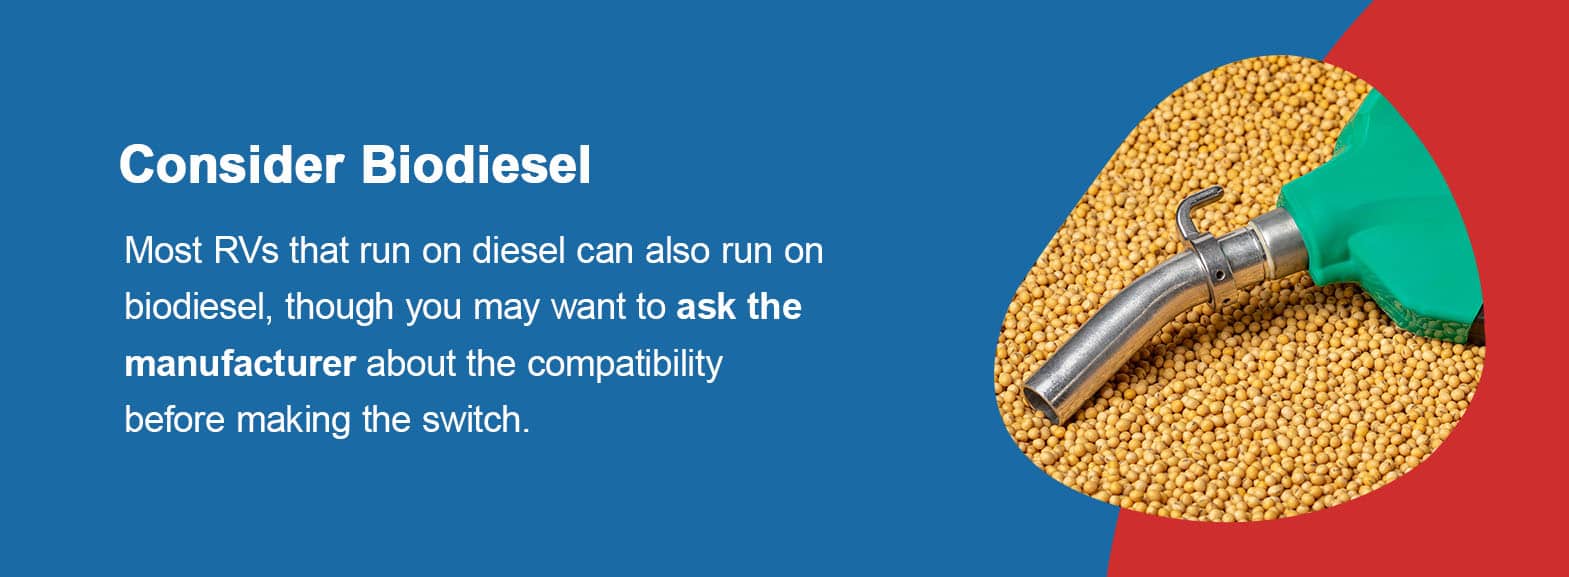 Consider Biodiesel. Most RVs that run on diesel can also run on biodiesel, though you may want to ask the manufacturer about the compatibility before making the switch. 